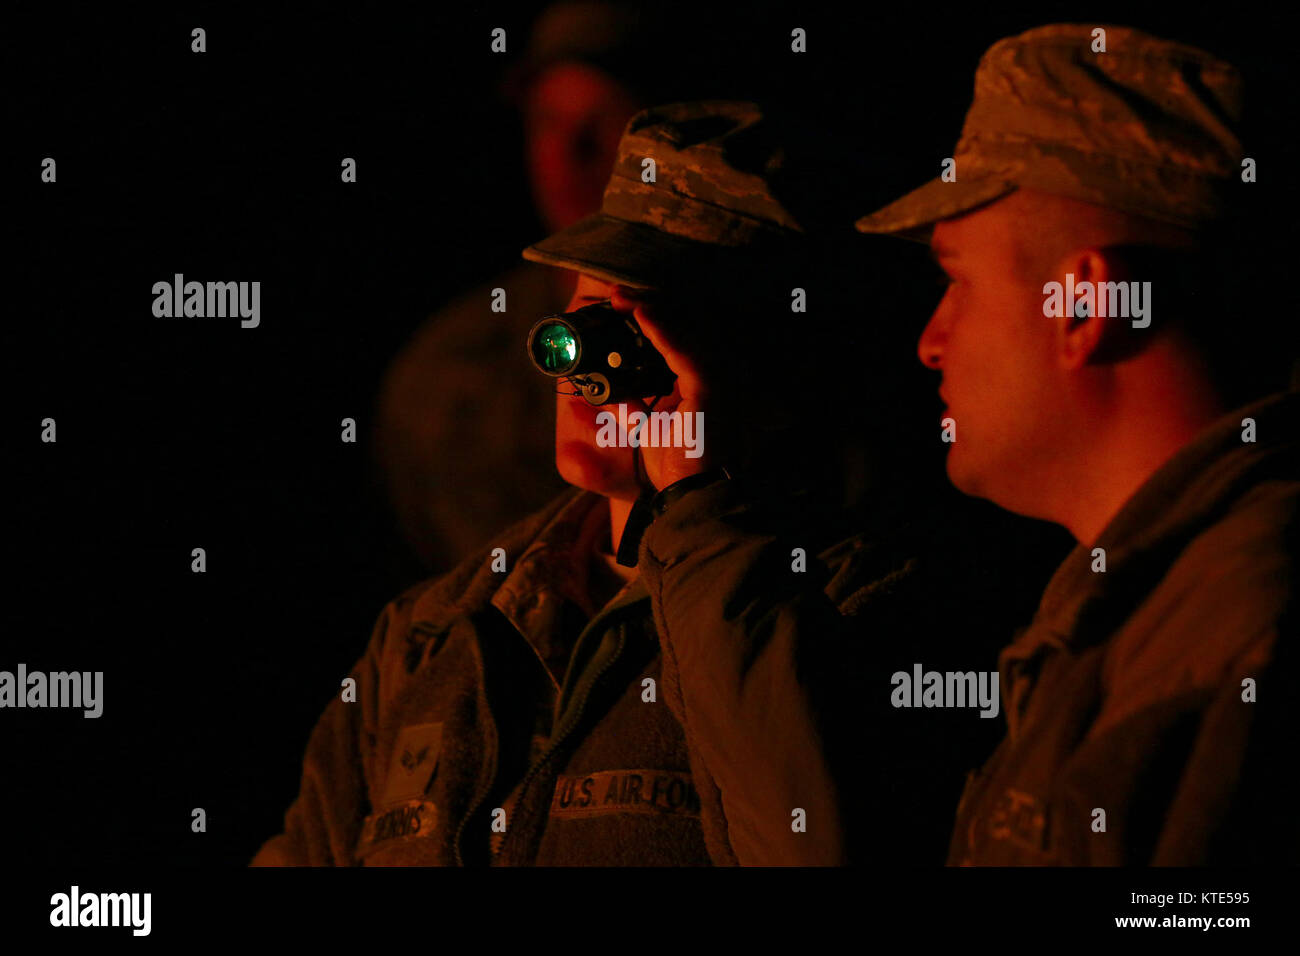 WRIGHT-PATTERSON AIR FORCE BASE, Ohio – Senior Airman Paula Dennis (left) and Senior Airman Tyler Acevedo, 445th Security Forces Squadron, test out night vision goggles during training at the Oakes Quarry, Fairborn on May 6, 2017.   The three-day expeditionary training consisted of several phases to include: Humvee mount/dismount, SERE, setting up/tear down tents, and night vision goggles. Stock Photo